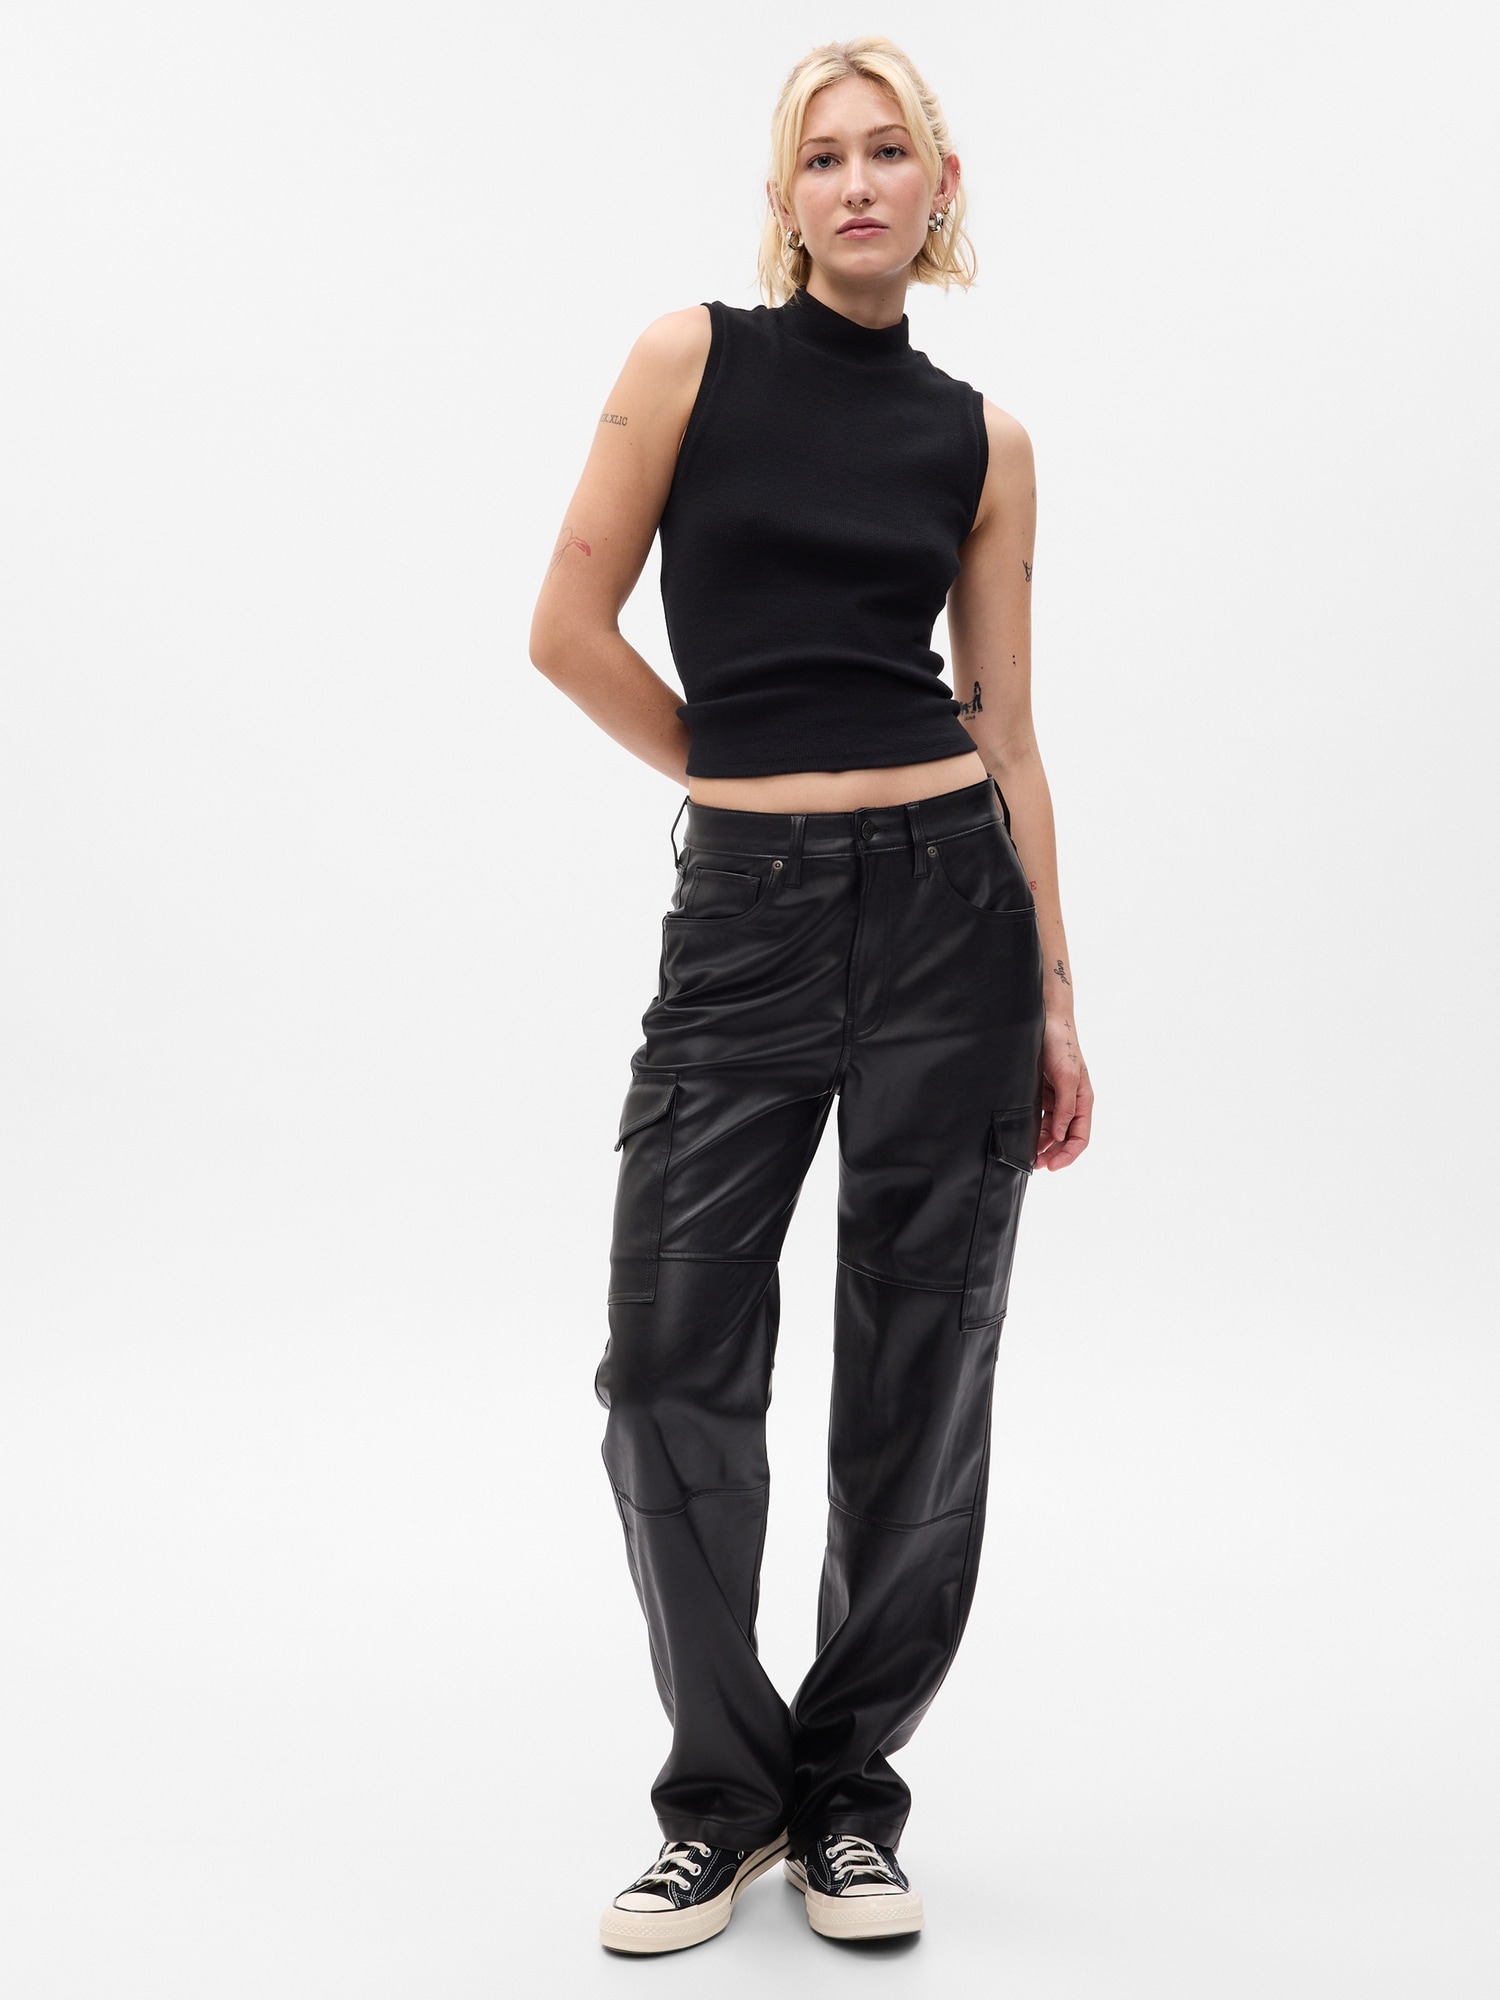 Black Leather Pants For Women